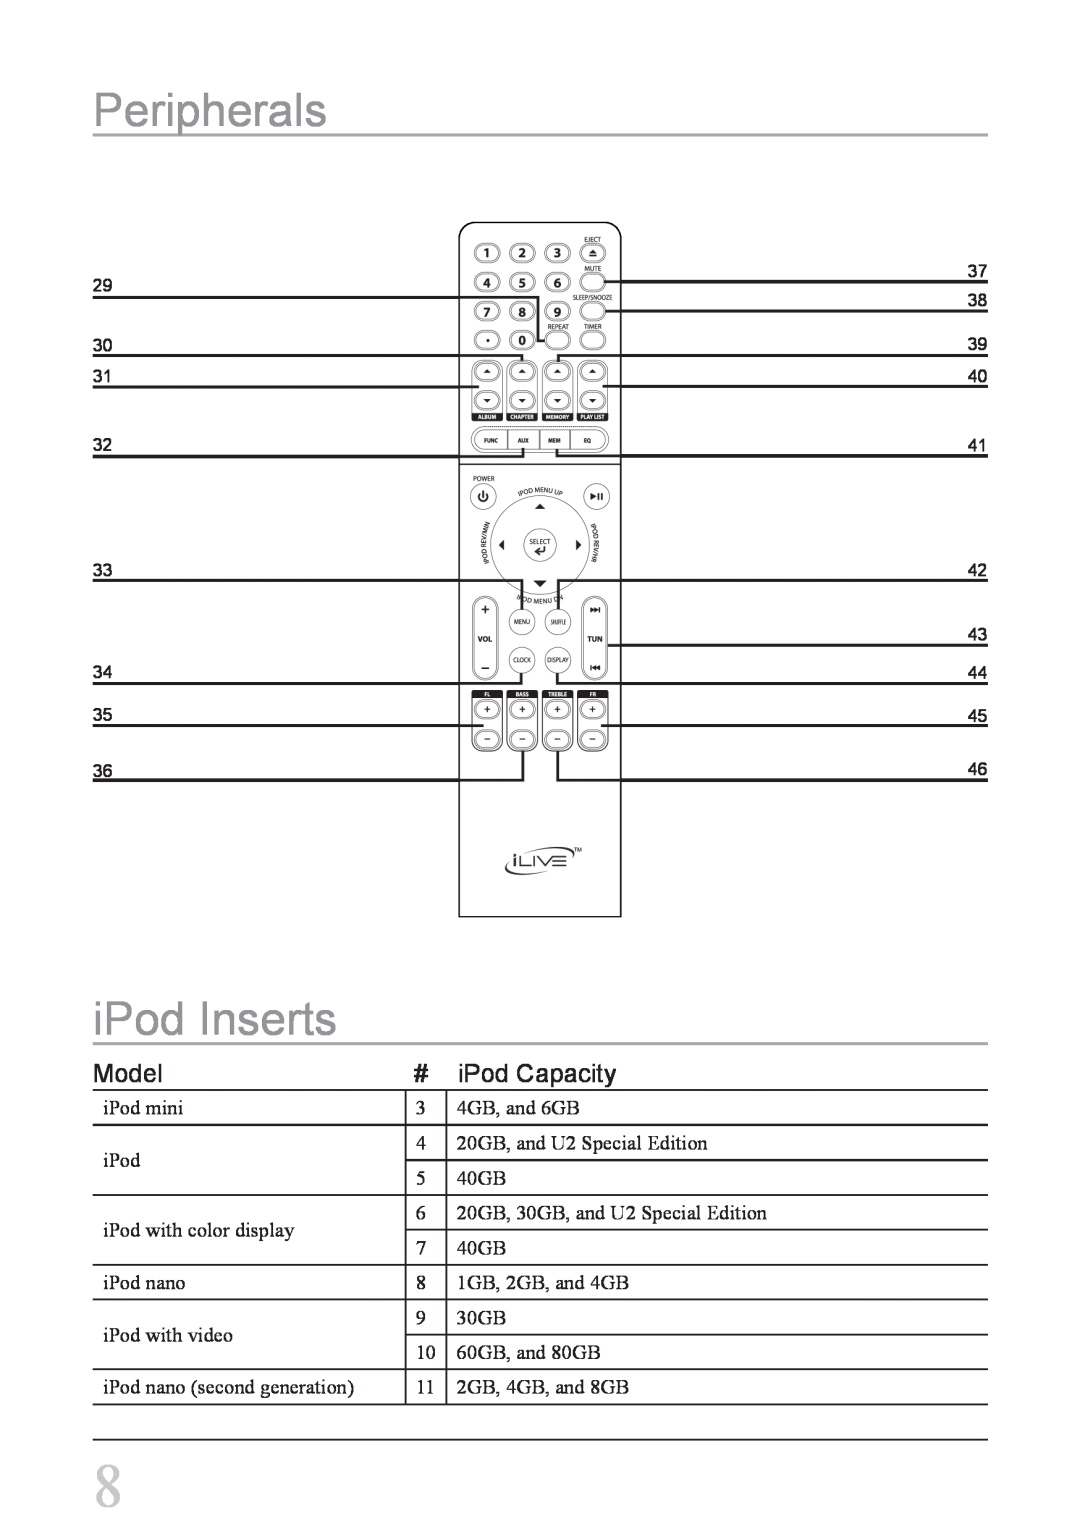 iLive IHS1 IHT3807DT instruction manual Peripherals, iPod Inserts, Model, iPod Capacity 